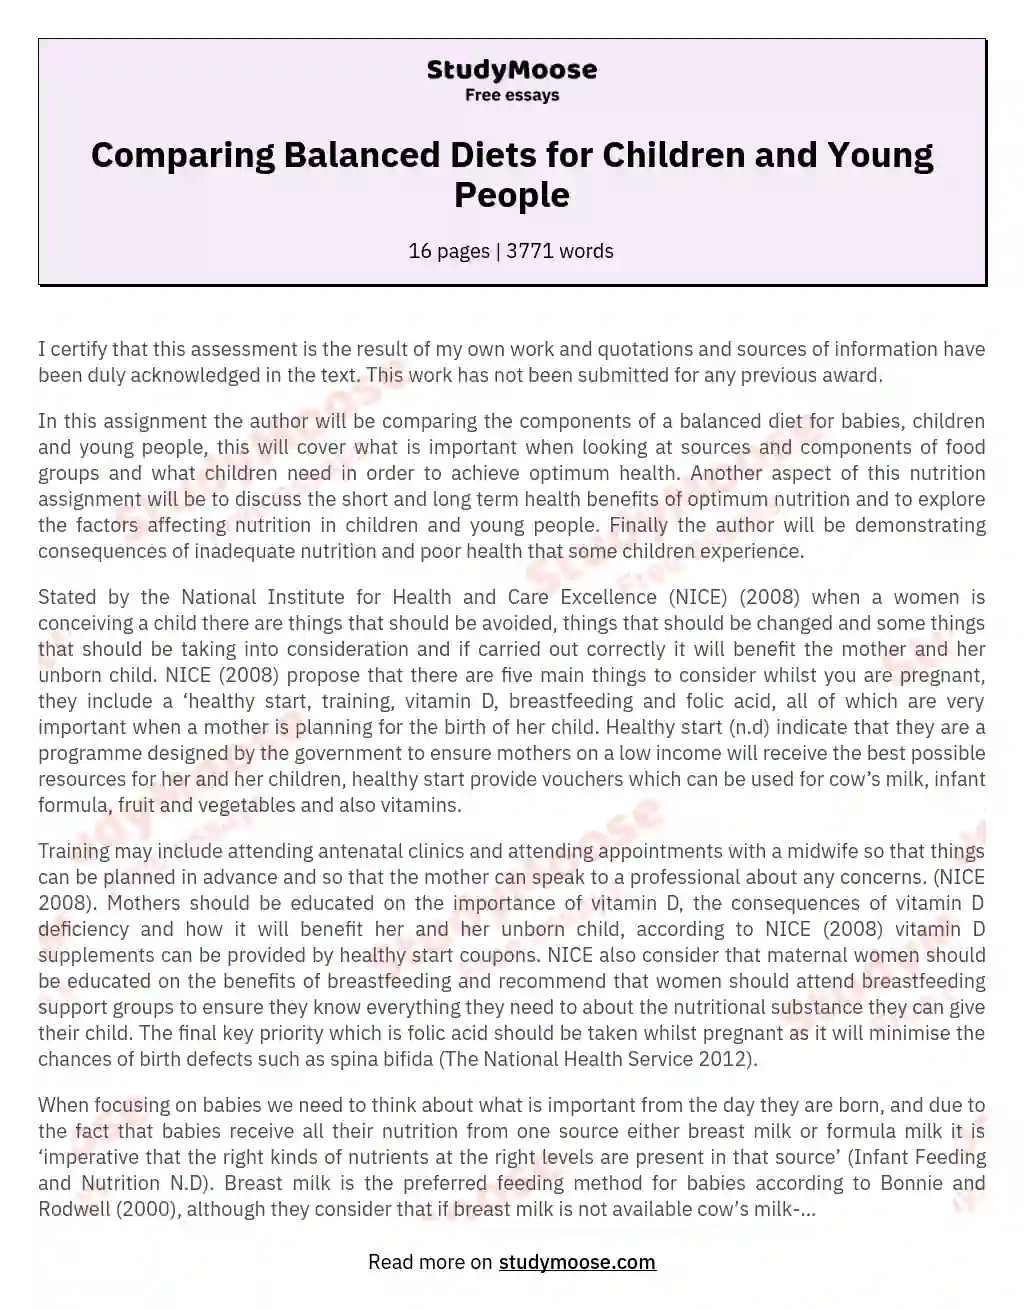 Comparing Balanced Diets for Children and Young People essay